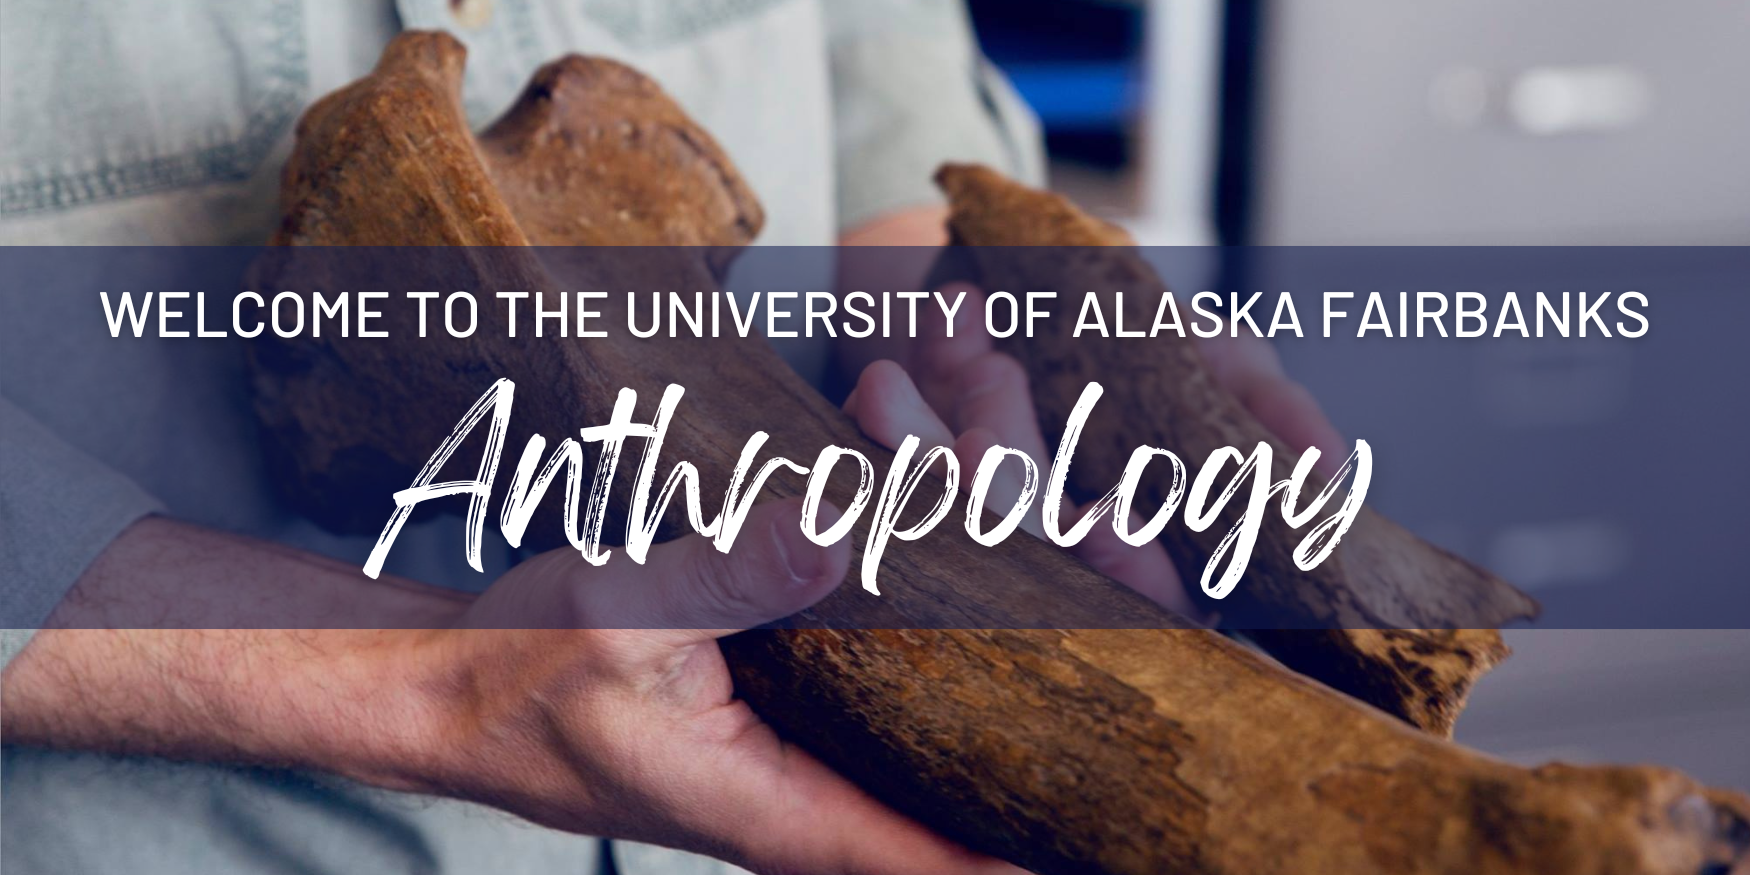 Welcome to the University of Alaska Fairbanks, Department of Anthropology website